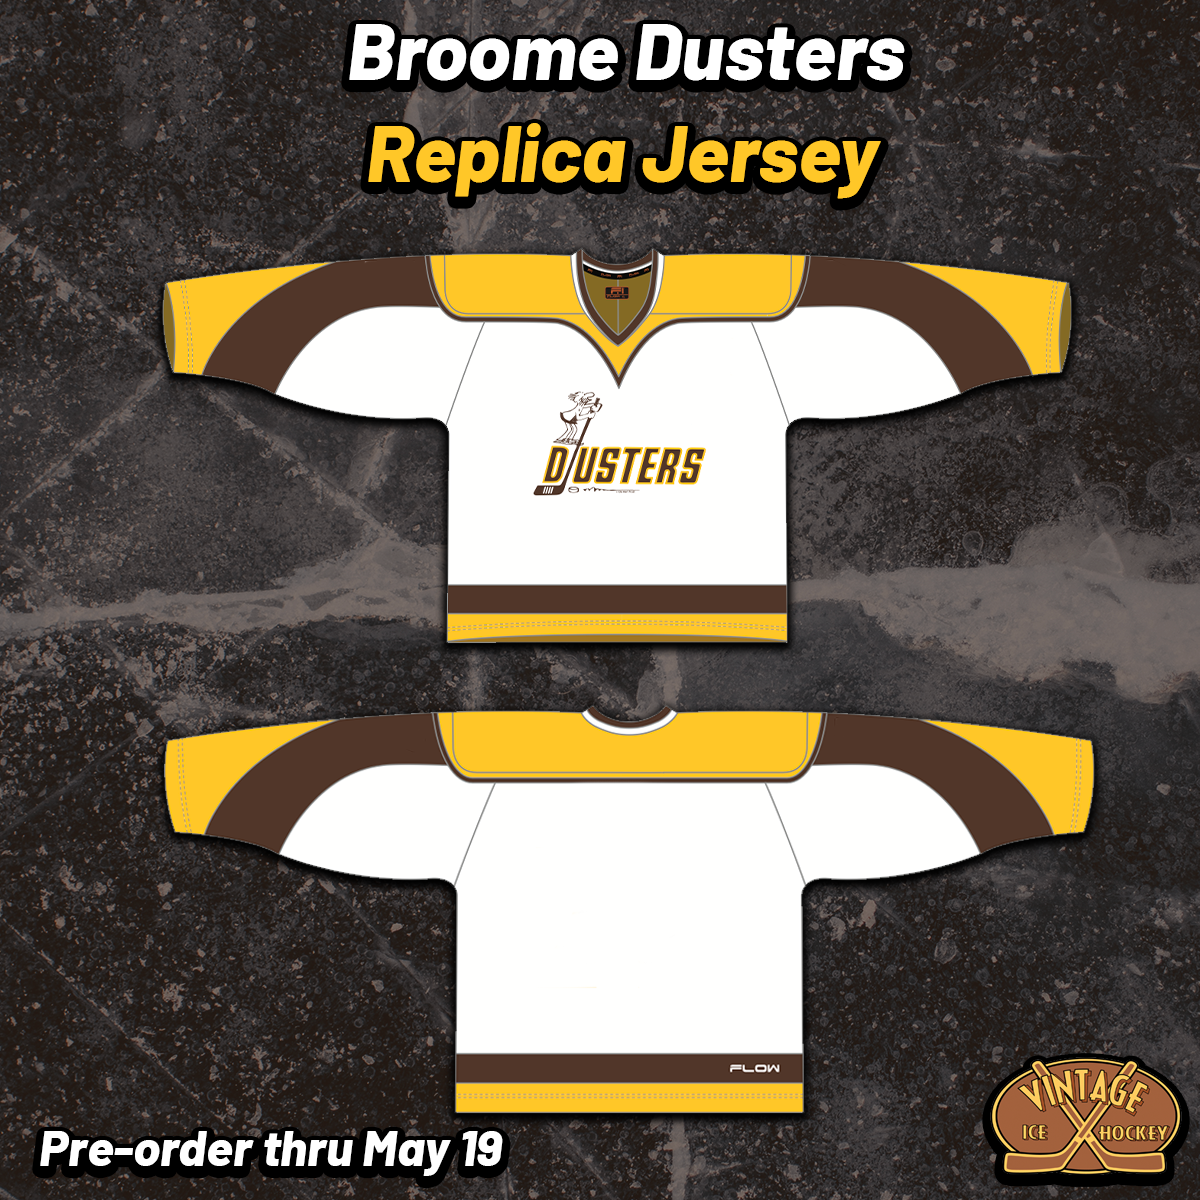 Broome Dusters Replica Jersey (BLANK - PRE-ORDER)